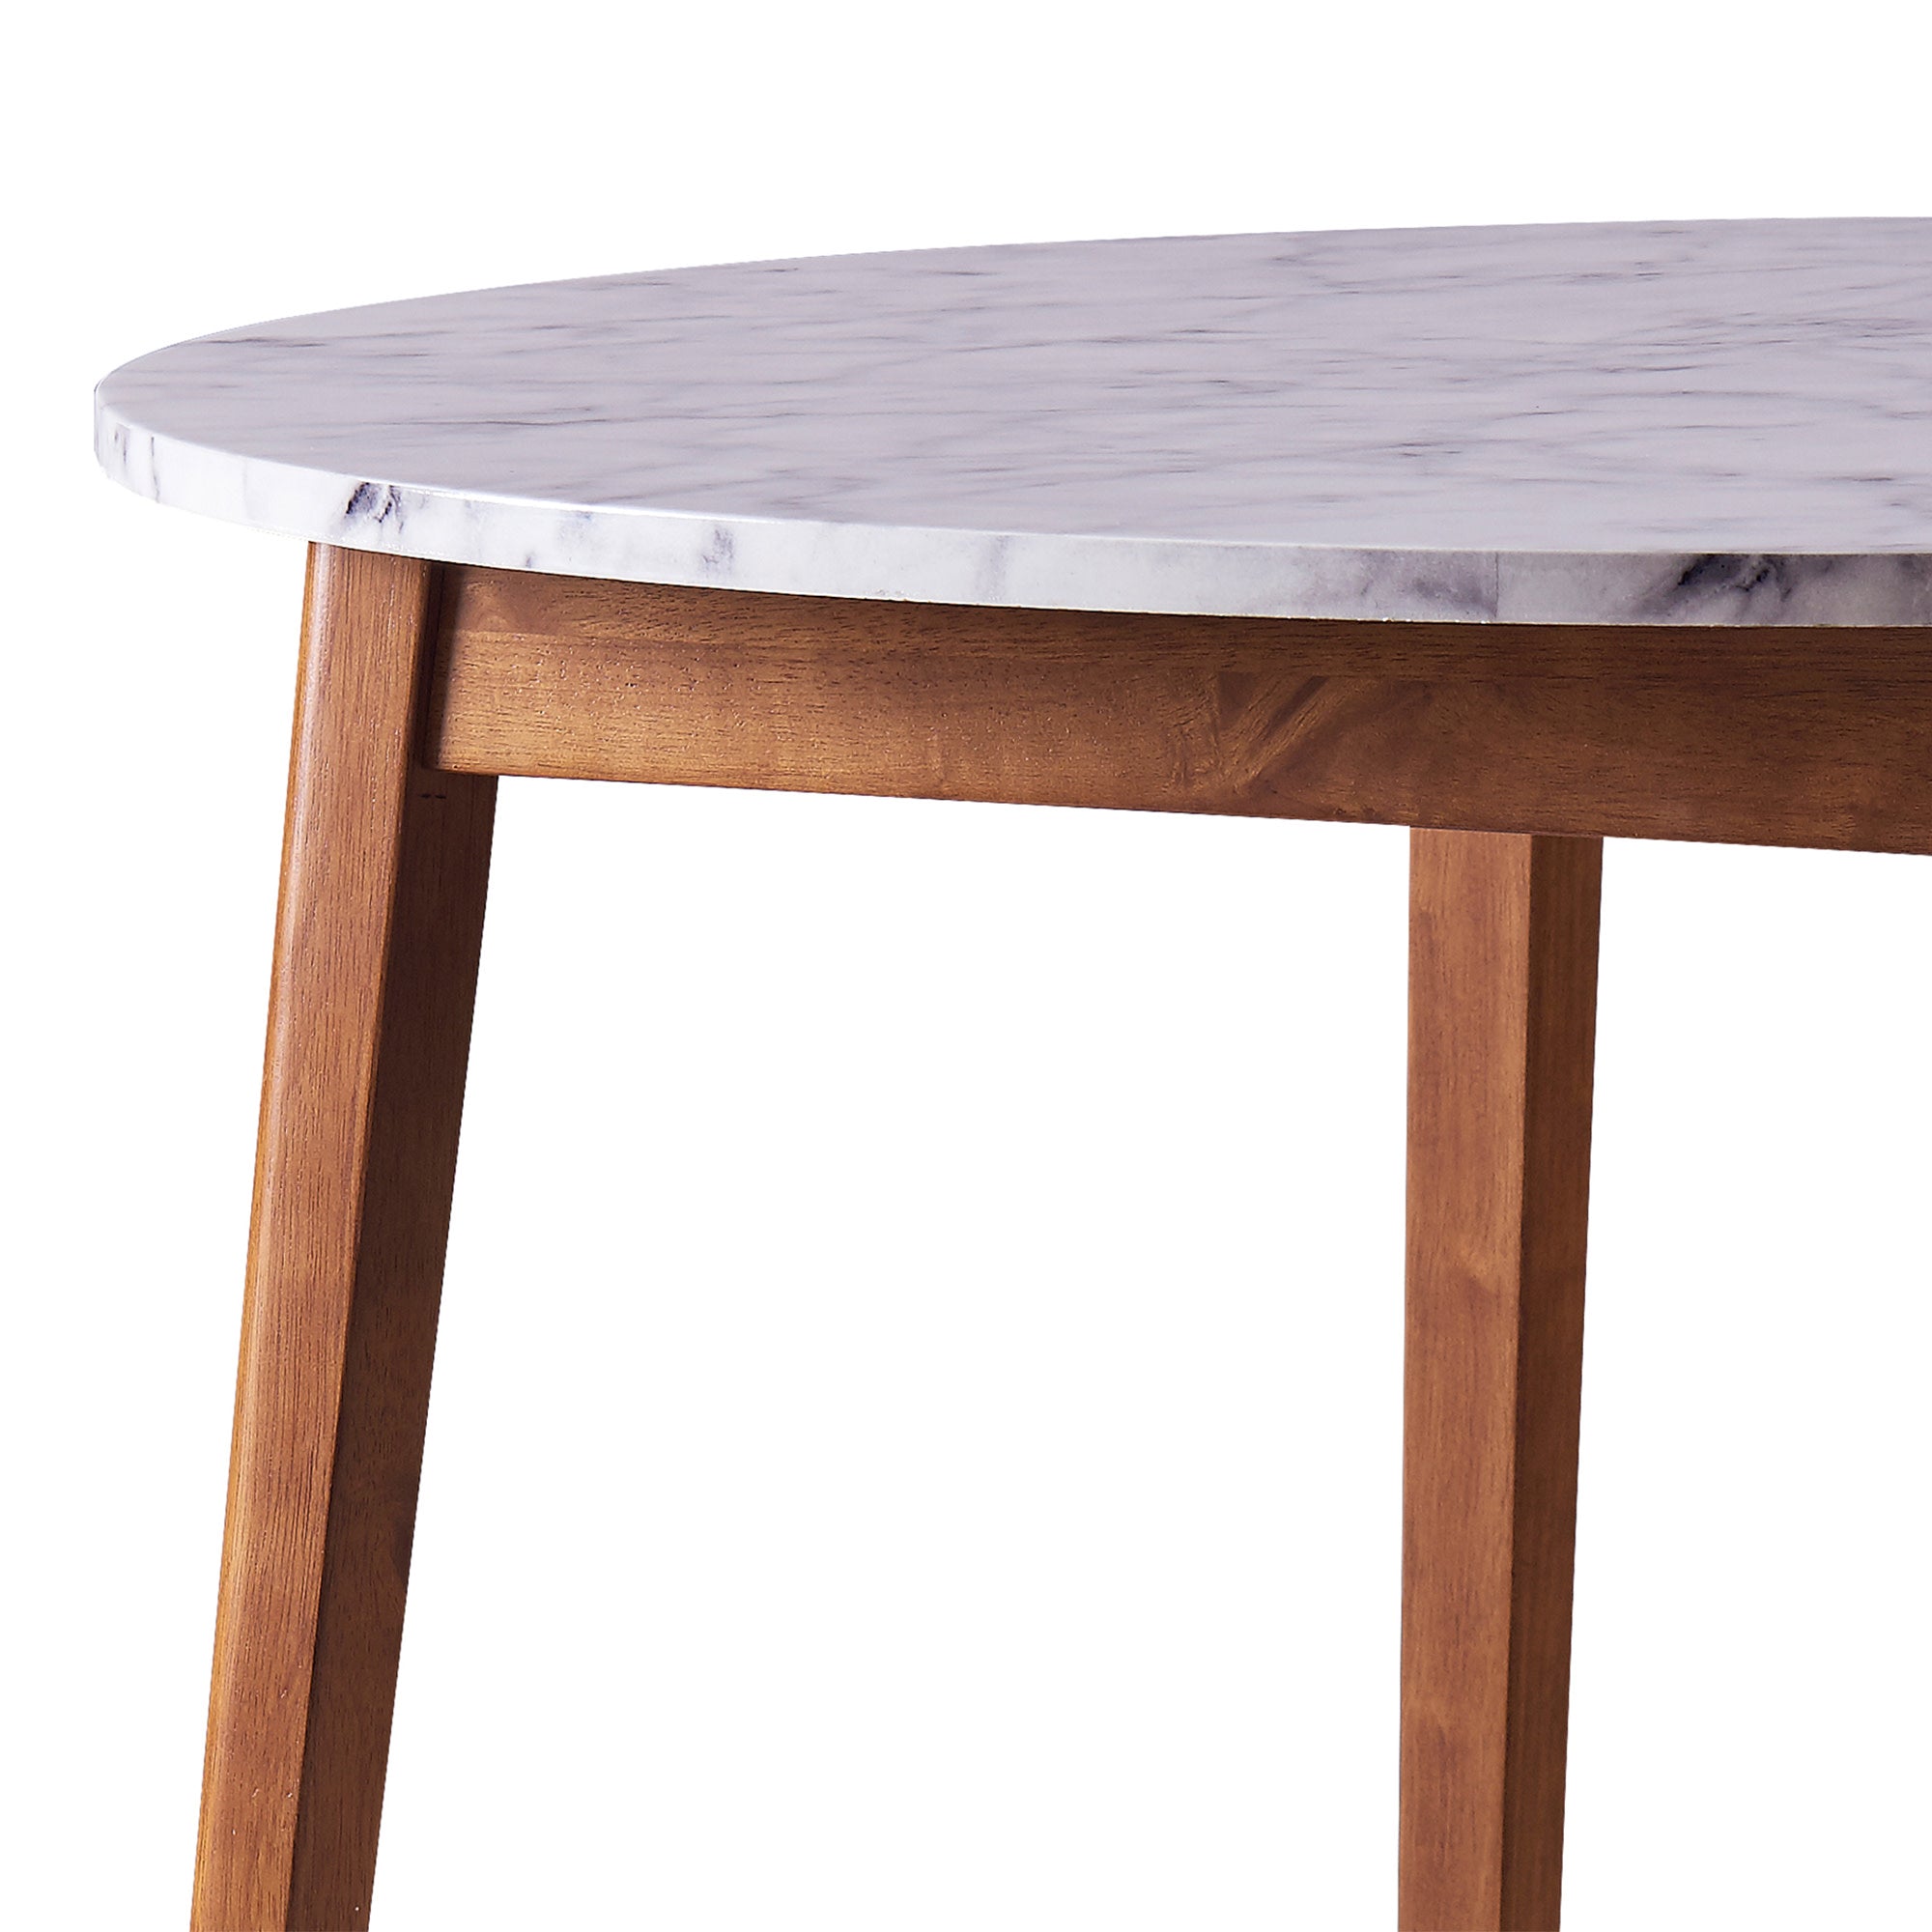 Teamson Home Ashton Wooden Round Dining Table with Faux Marble Top, White/Walnut